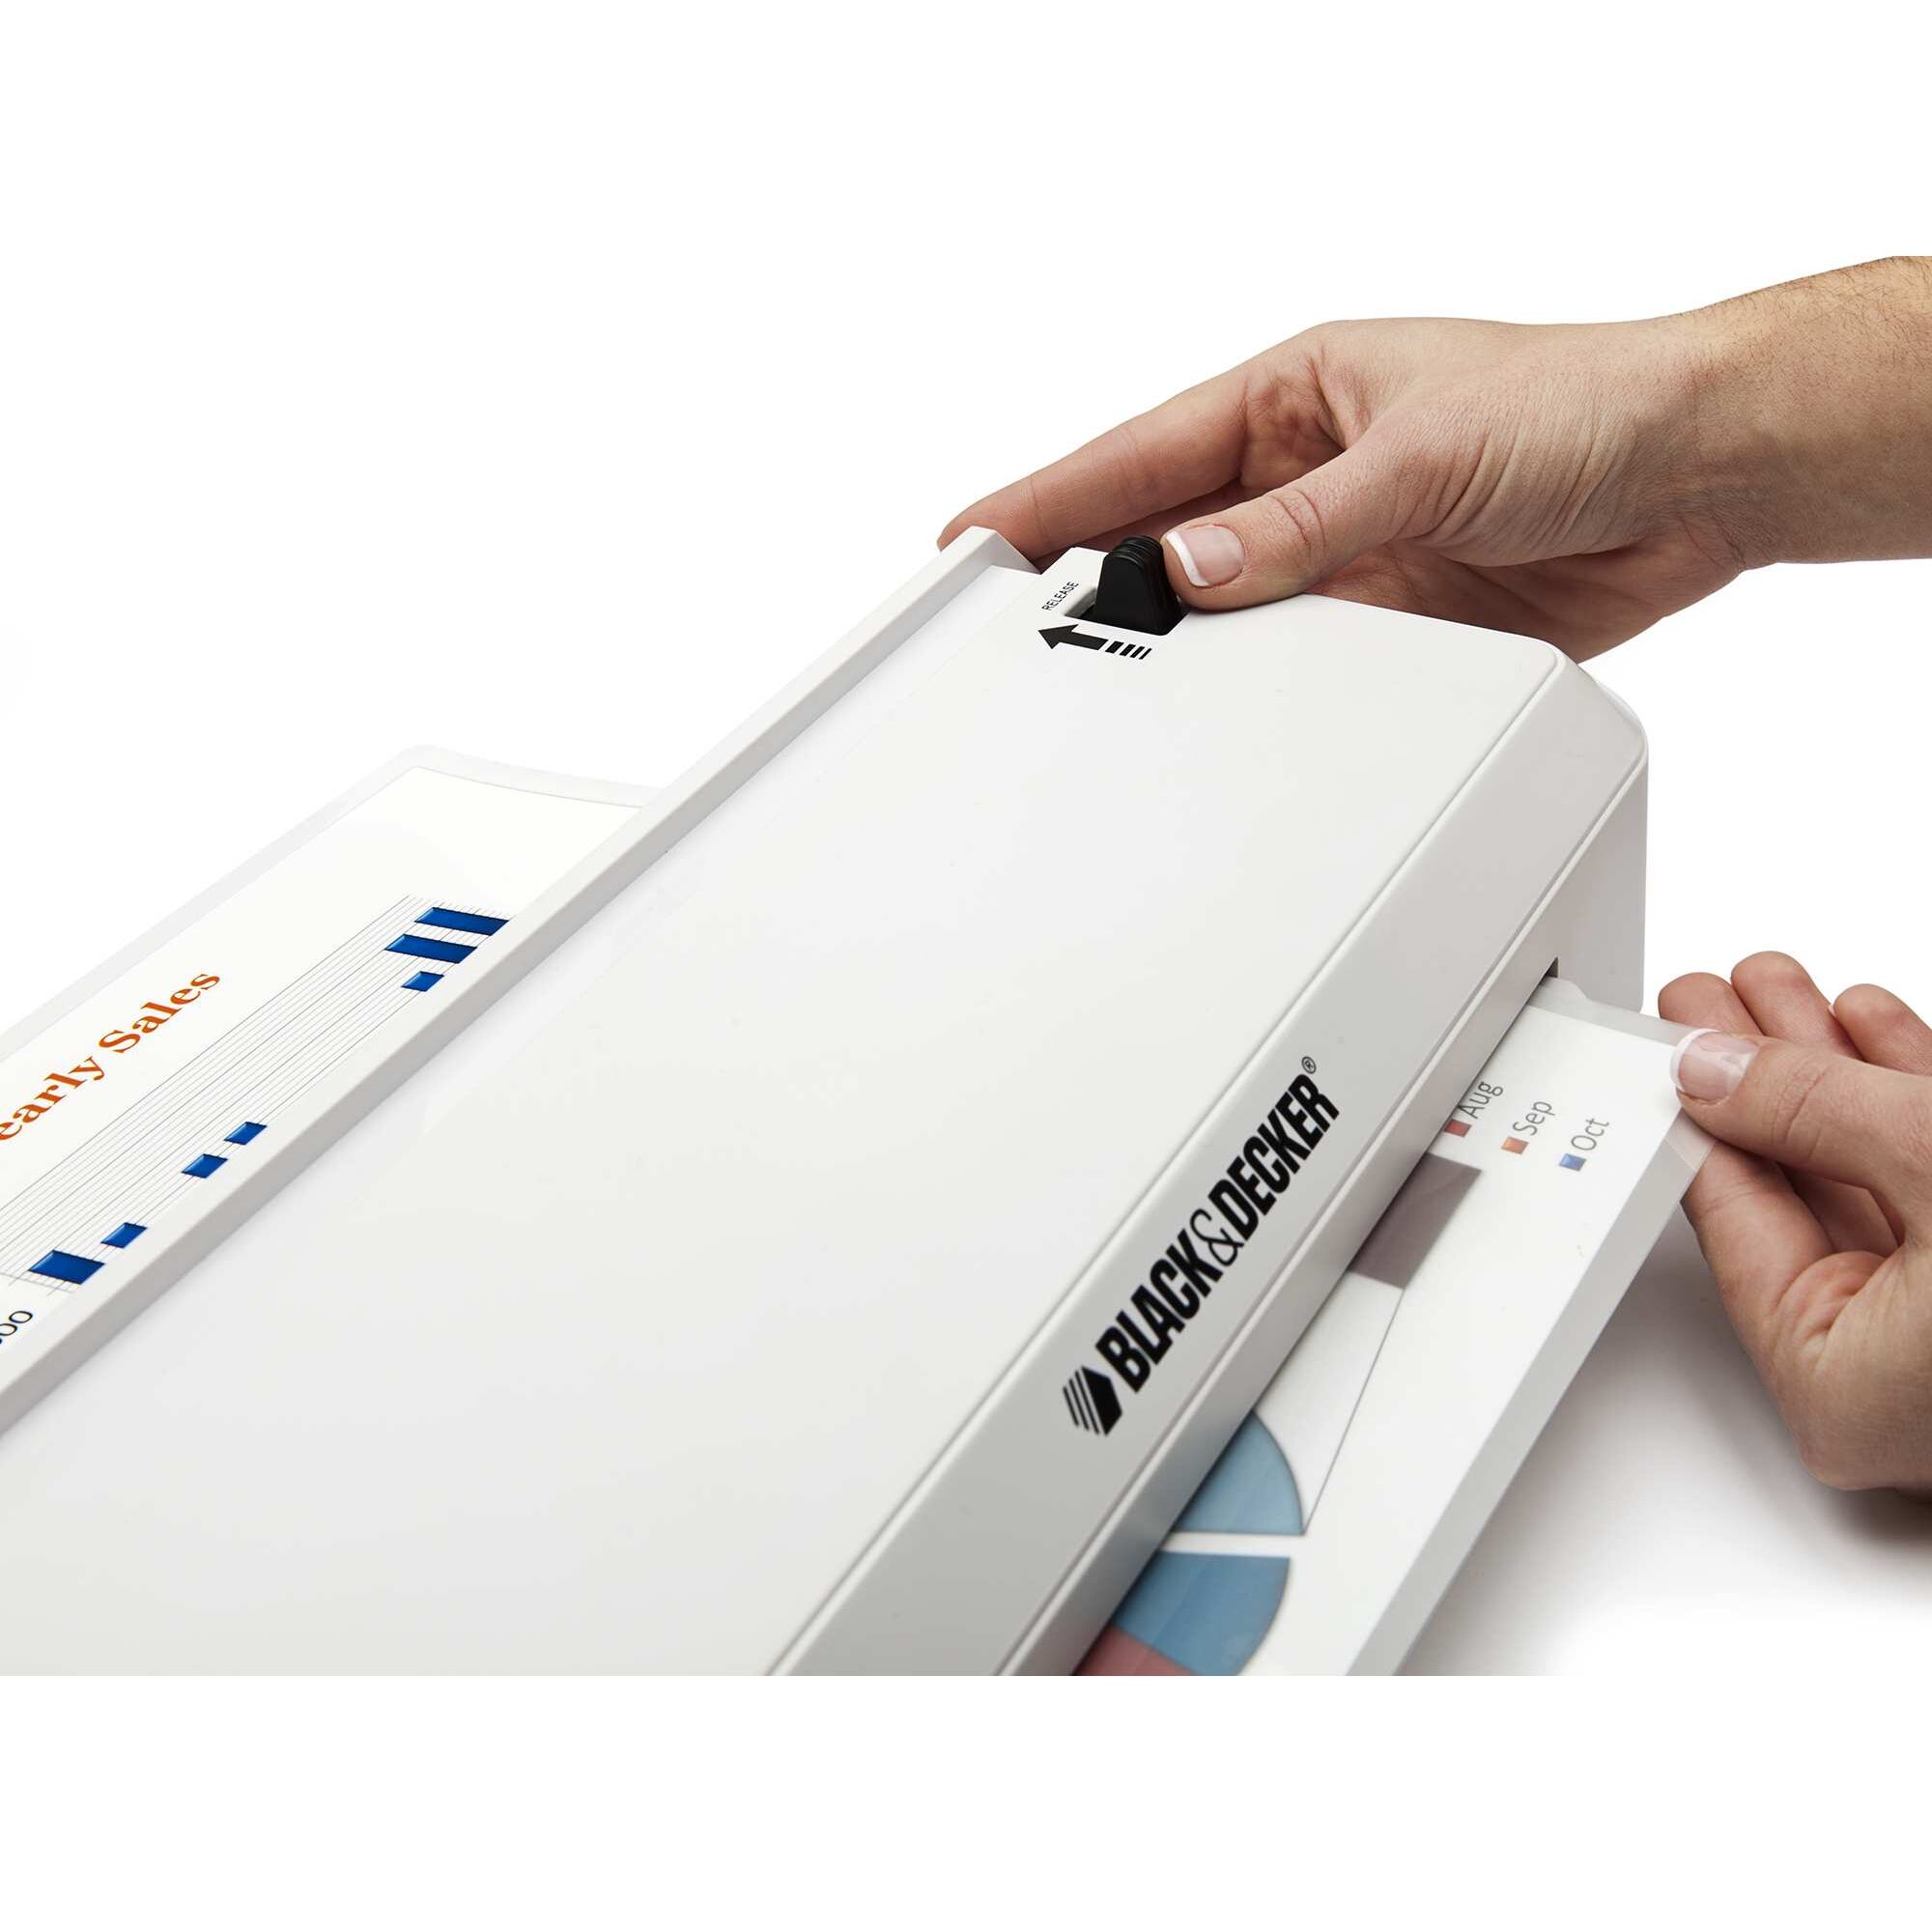 Flash 9.5 inch thermal laminator being used to laminate a sheet of paper.